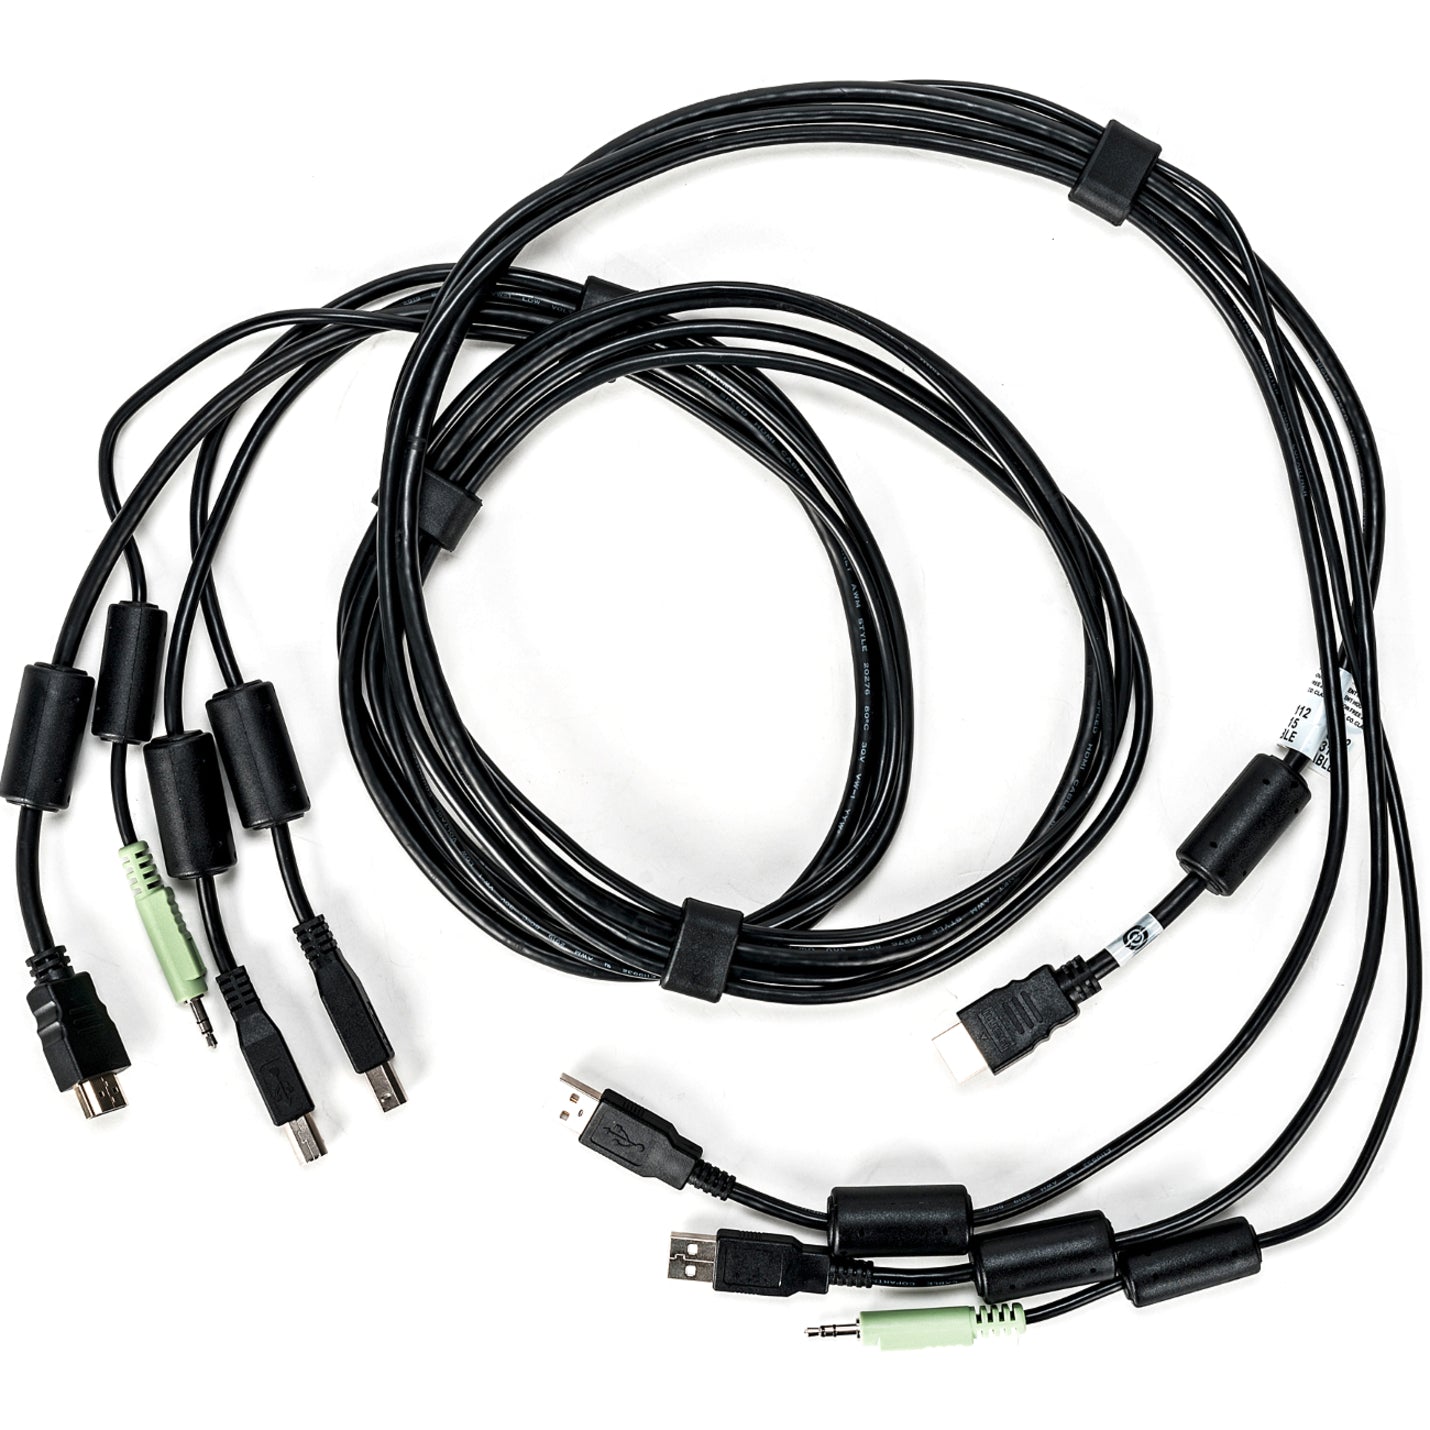 AVOCENT CBL0112 SC845H Cable - 6ft, USB to HDMI Digital Audio/Video